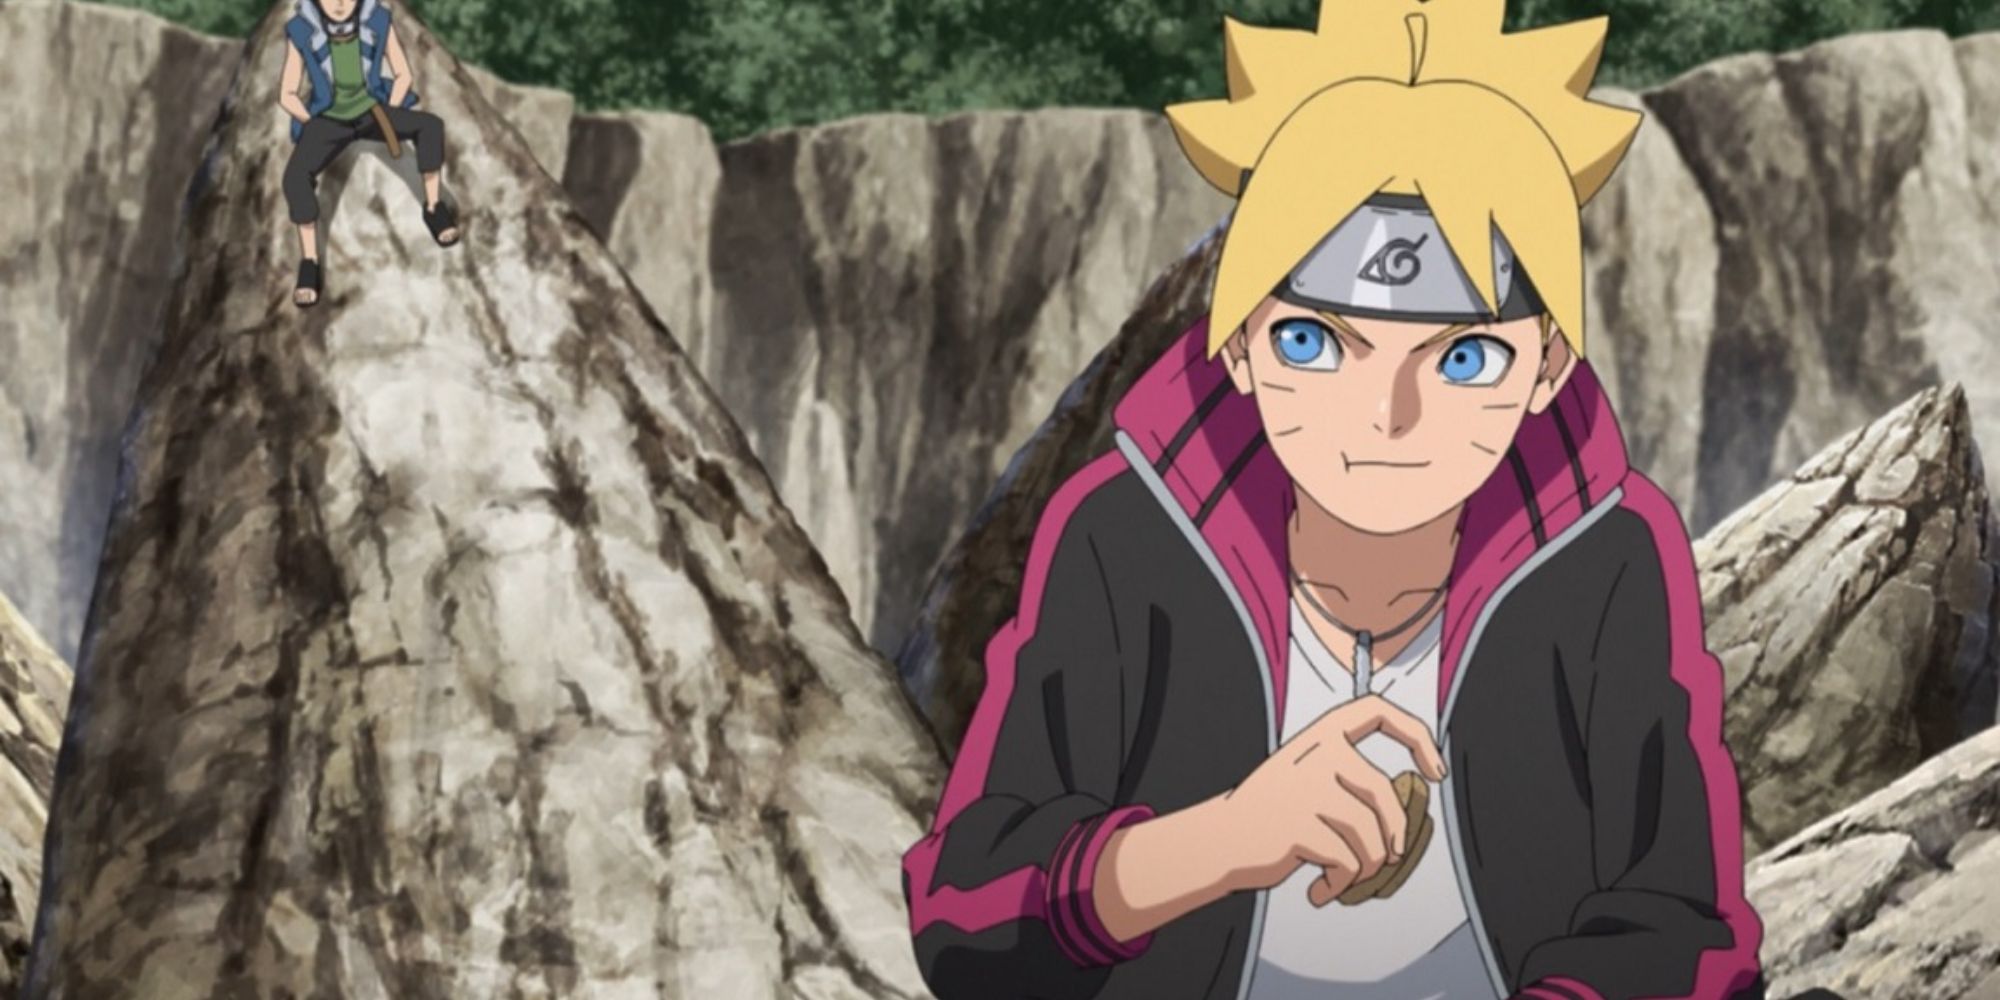 THE FORESHADOWING IS CRAZY!! Boruto: Naruto Next Generations